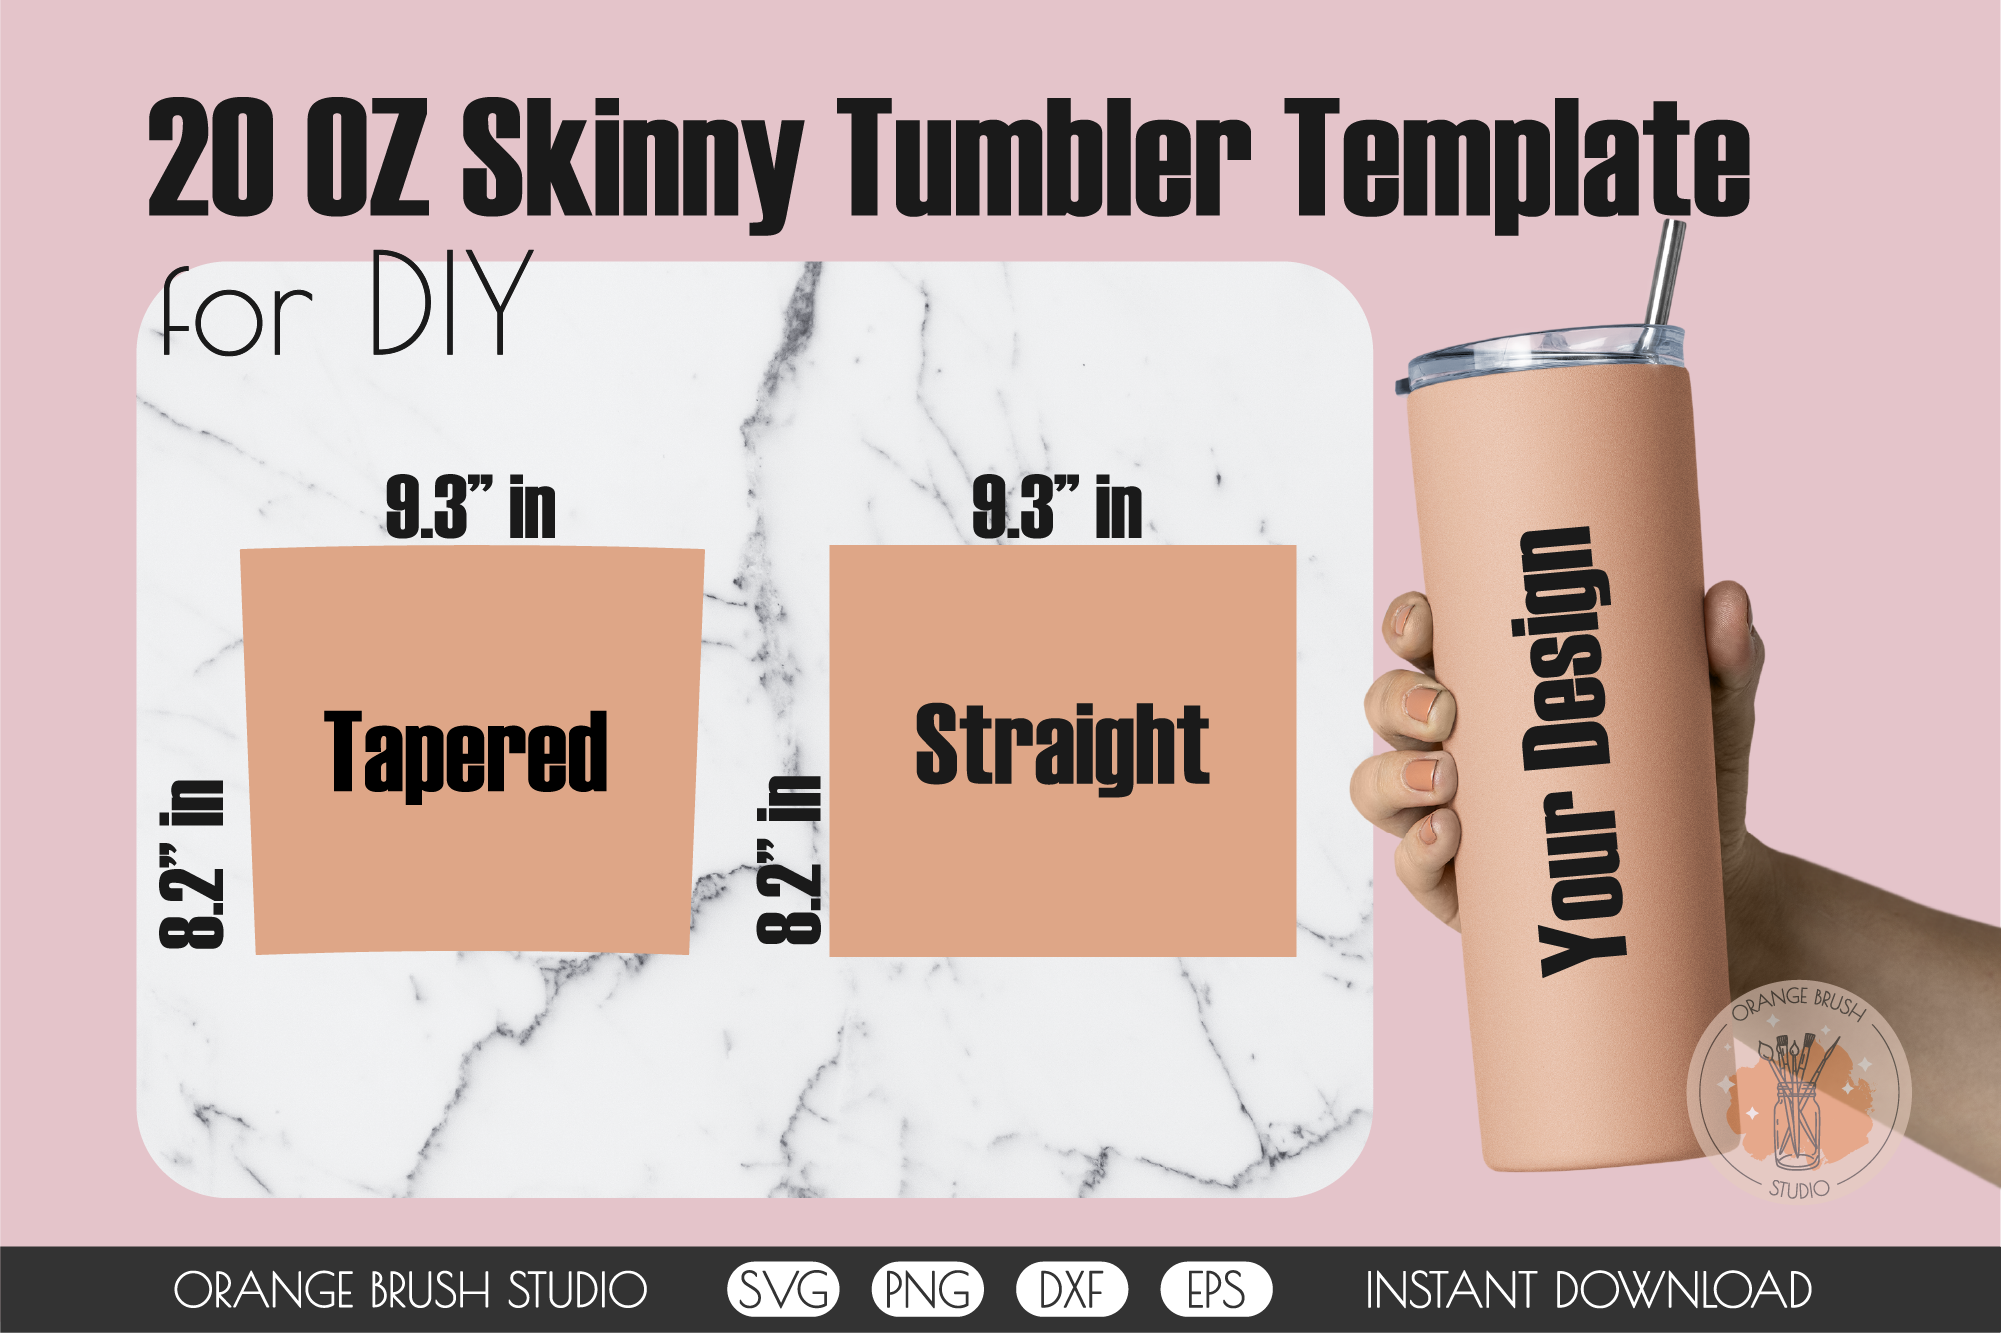 20-oz-skinny-tumbler-template-straight-and-tapered-wraps-svg-by-orange